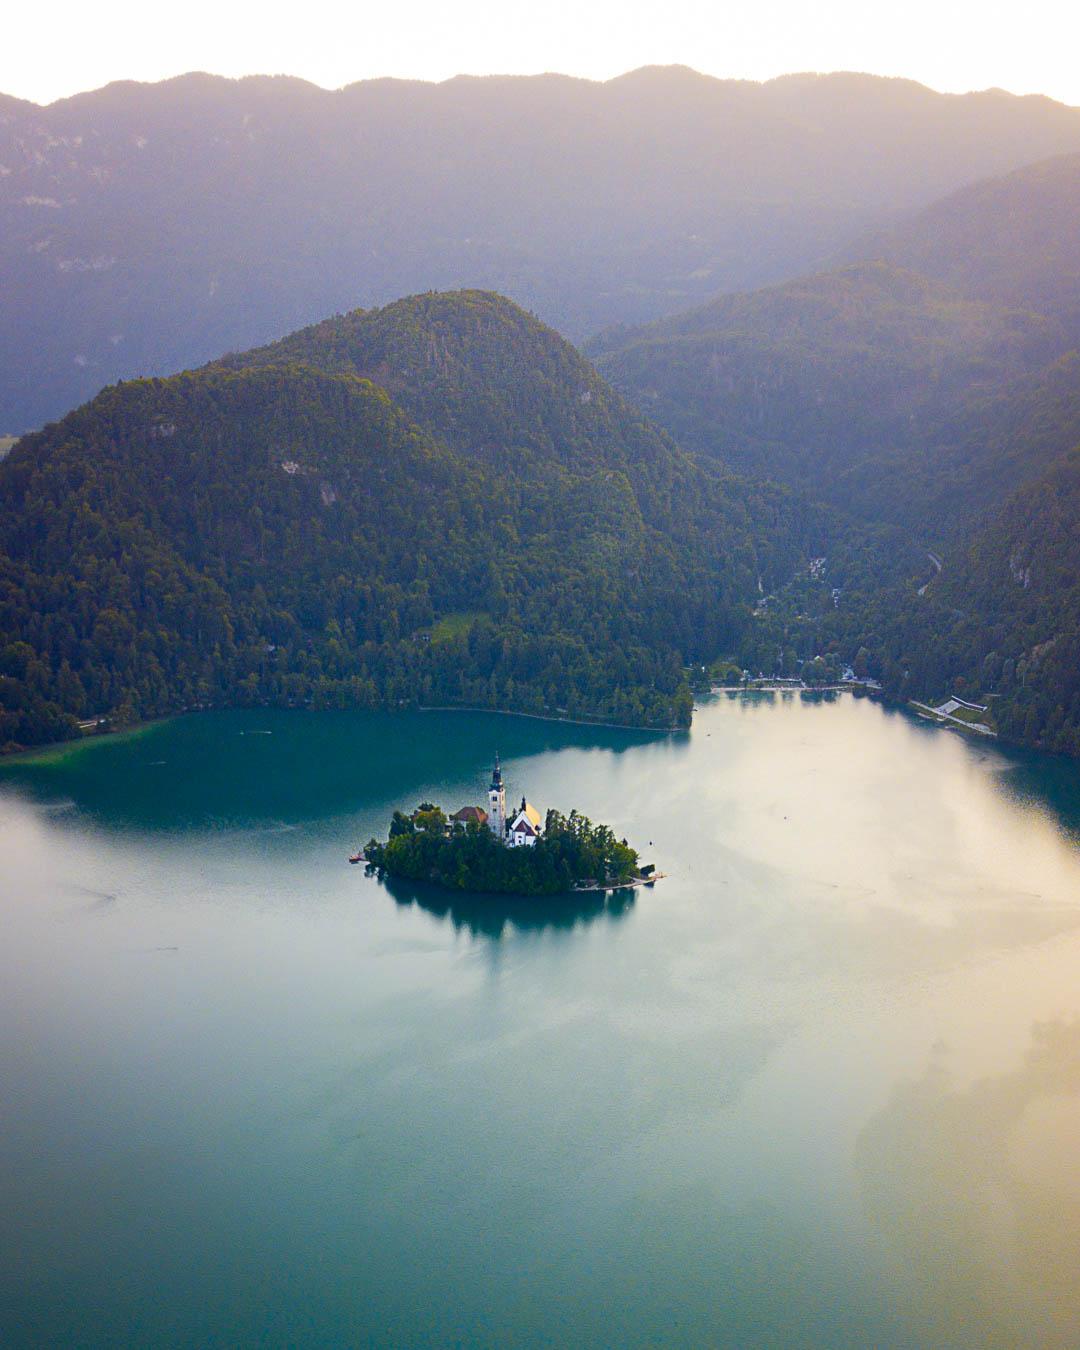 bled island surrounded by the julian alps